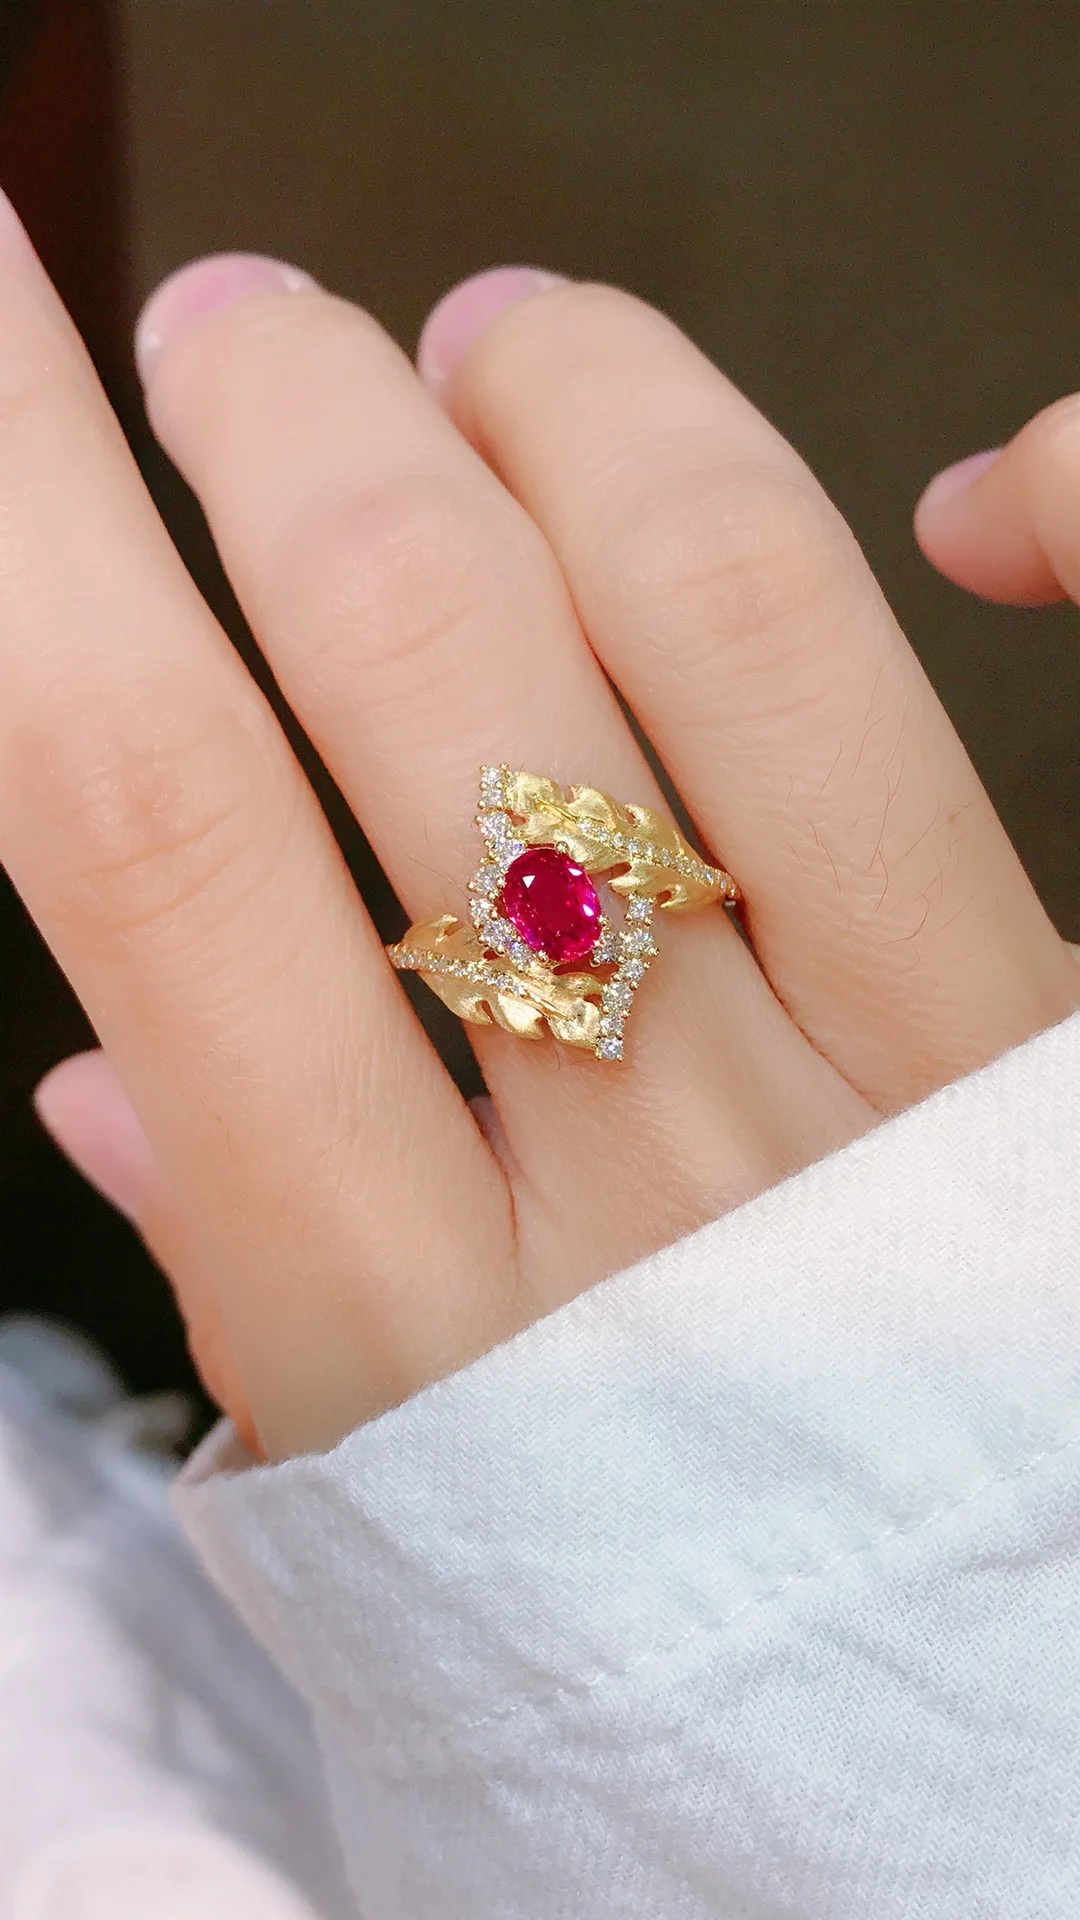 GUILD 6937 Solid 18K Gold Nature 0.80ct Pigeon Blood Red Ruby Diamonds Rings Women Fine Jewelry Presents the Six-word Admonition